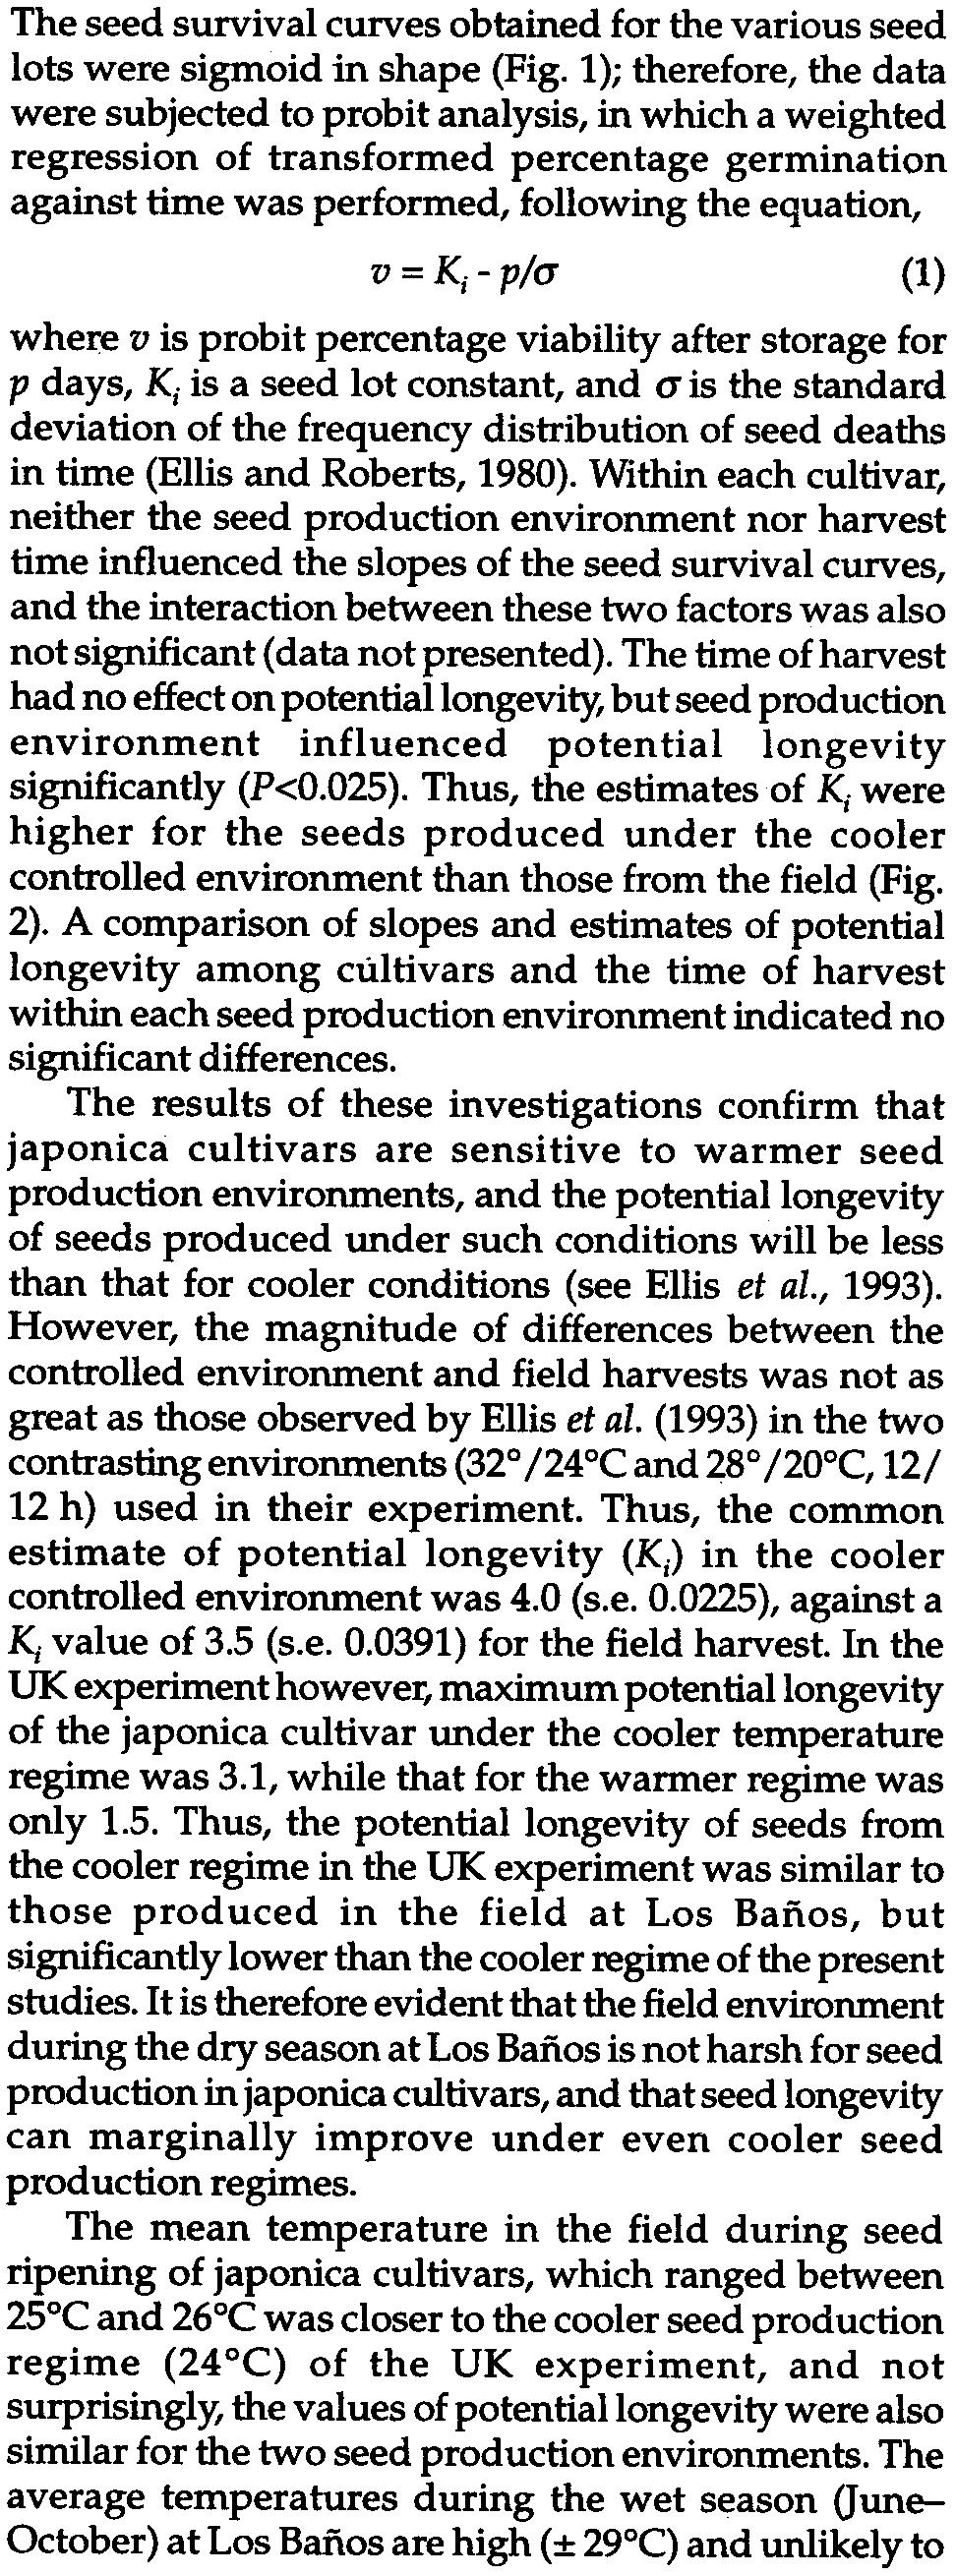 significant (data not presented). The time of harvest had no effect on potential longevity, but seed production environment influenced potential longevity significantly (P<0.025).